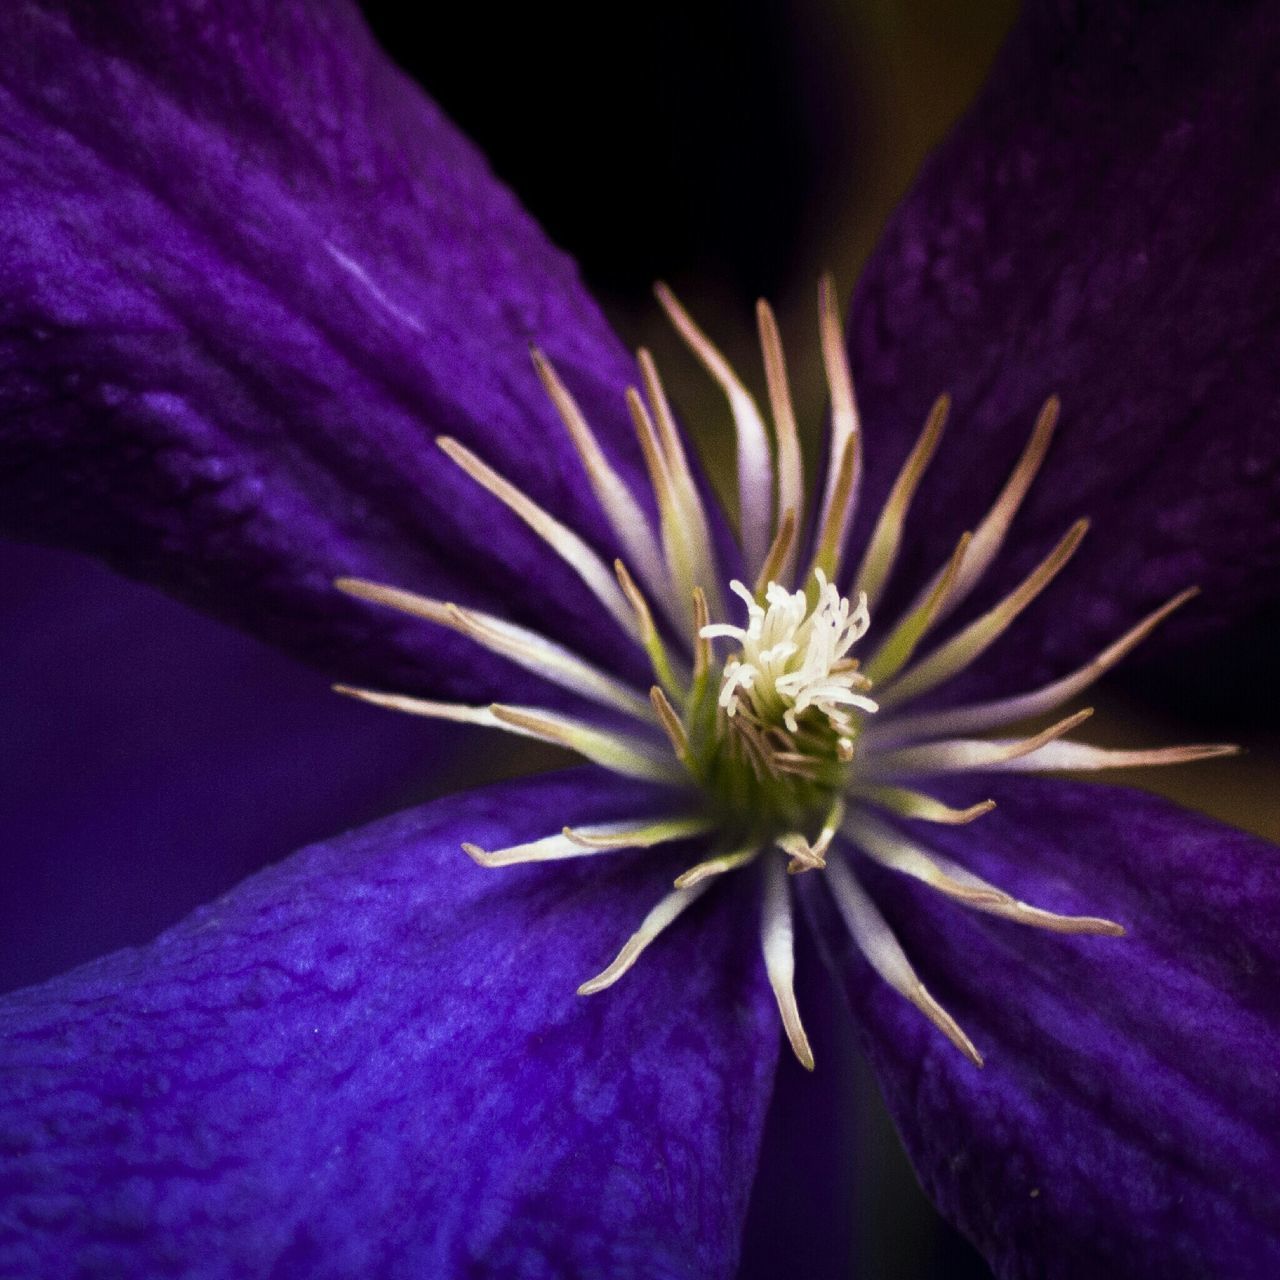 flower, petal, purple, fragility, flower head, freshness, beauty in nature, close-up, growth, pollen, nature, stamen, blooming, in bloom, single flower, blue, blossom, no people, plant, selective focus